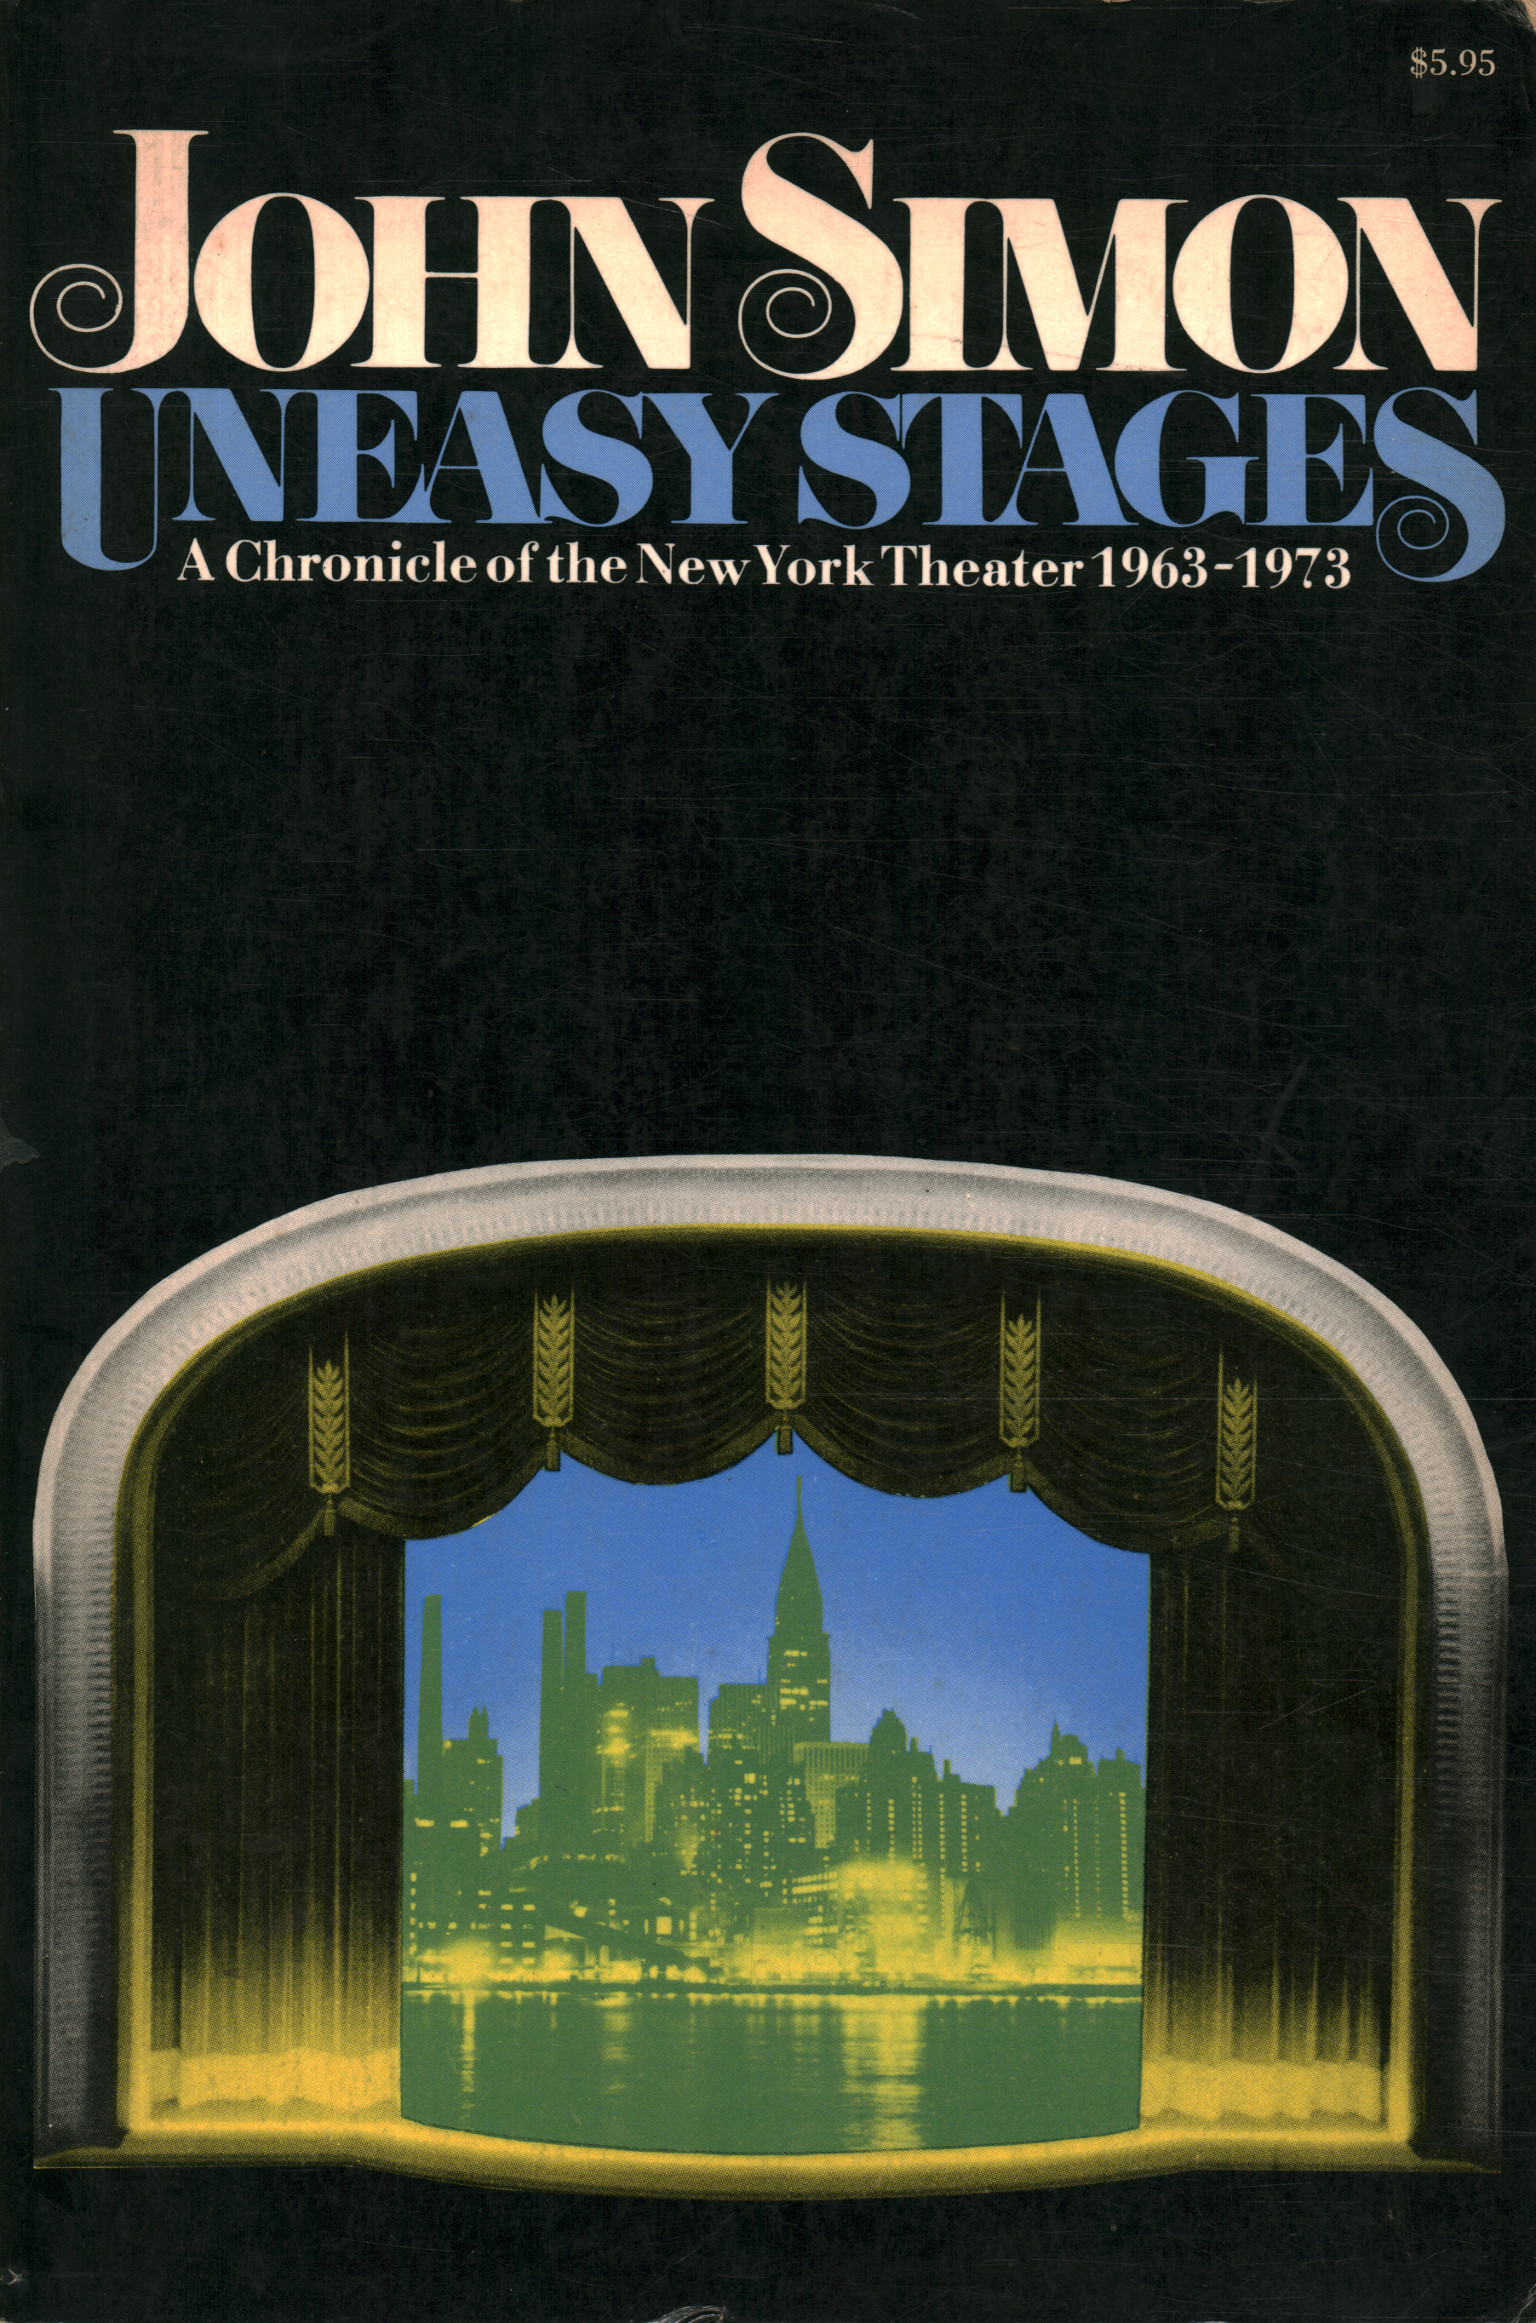 Uneasy stages